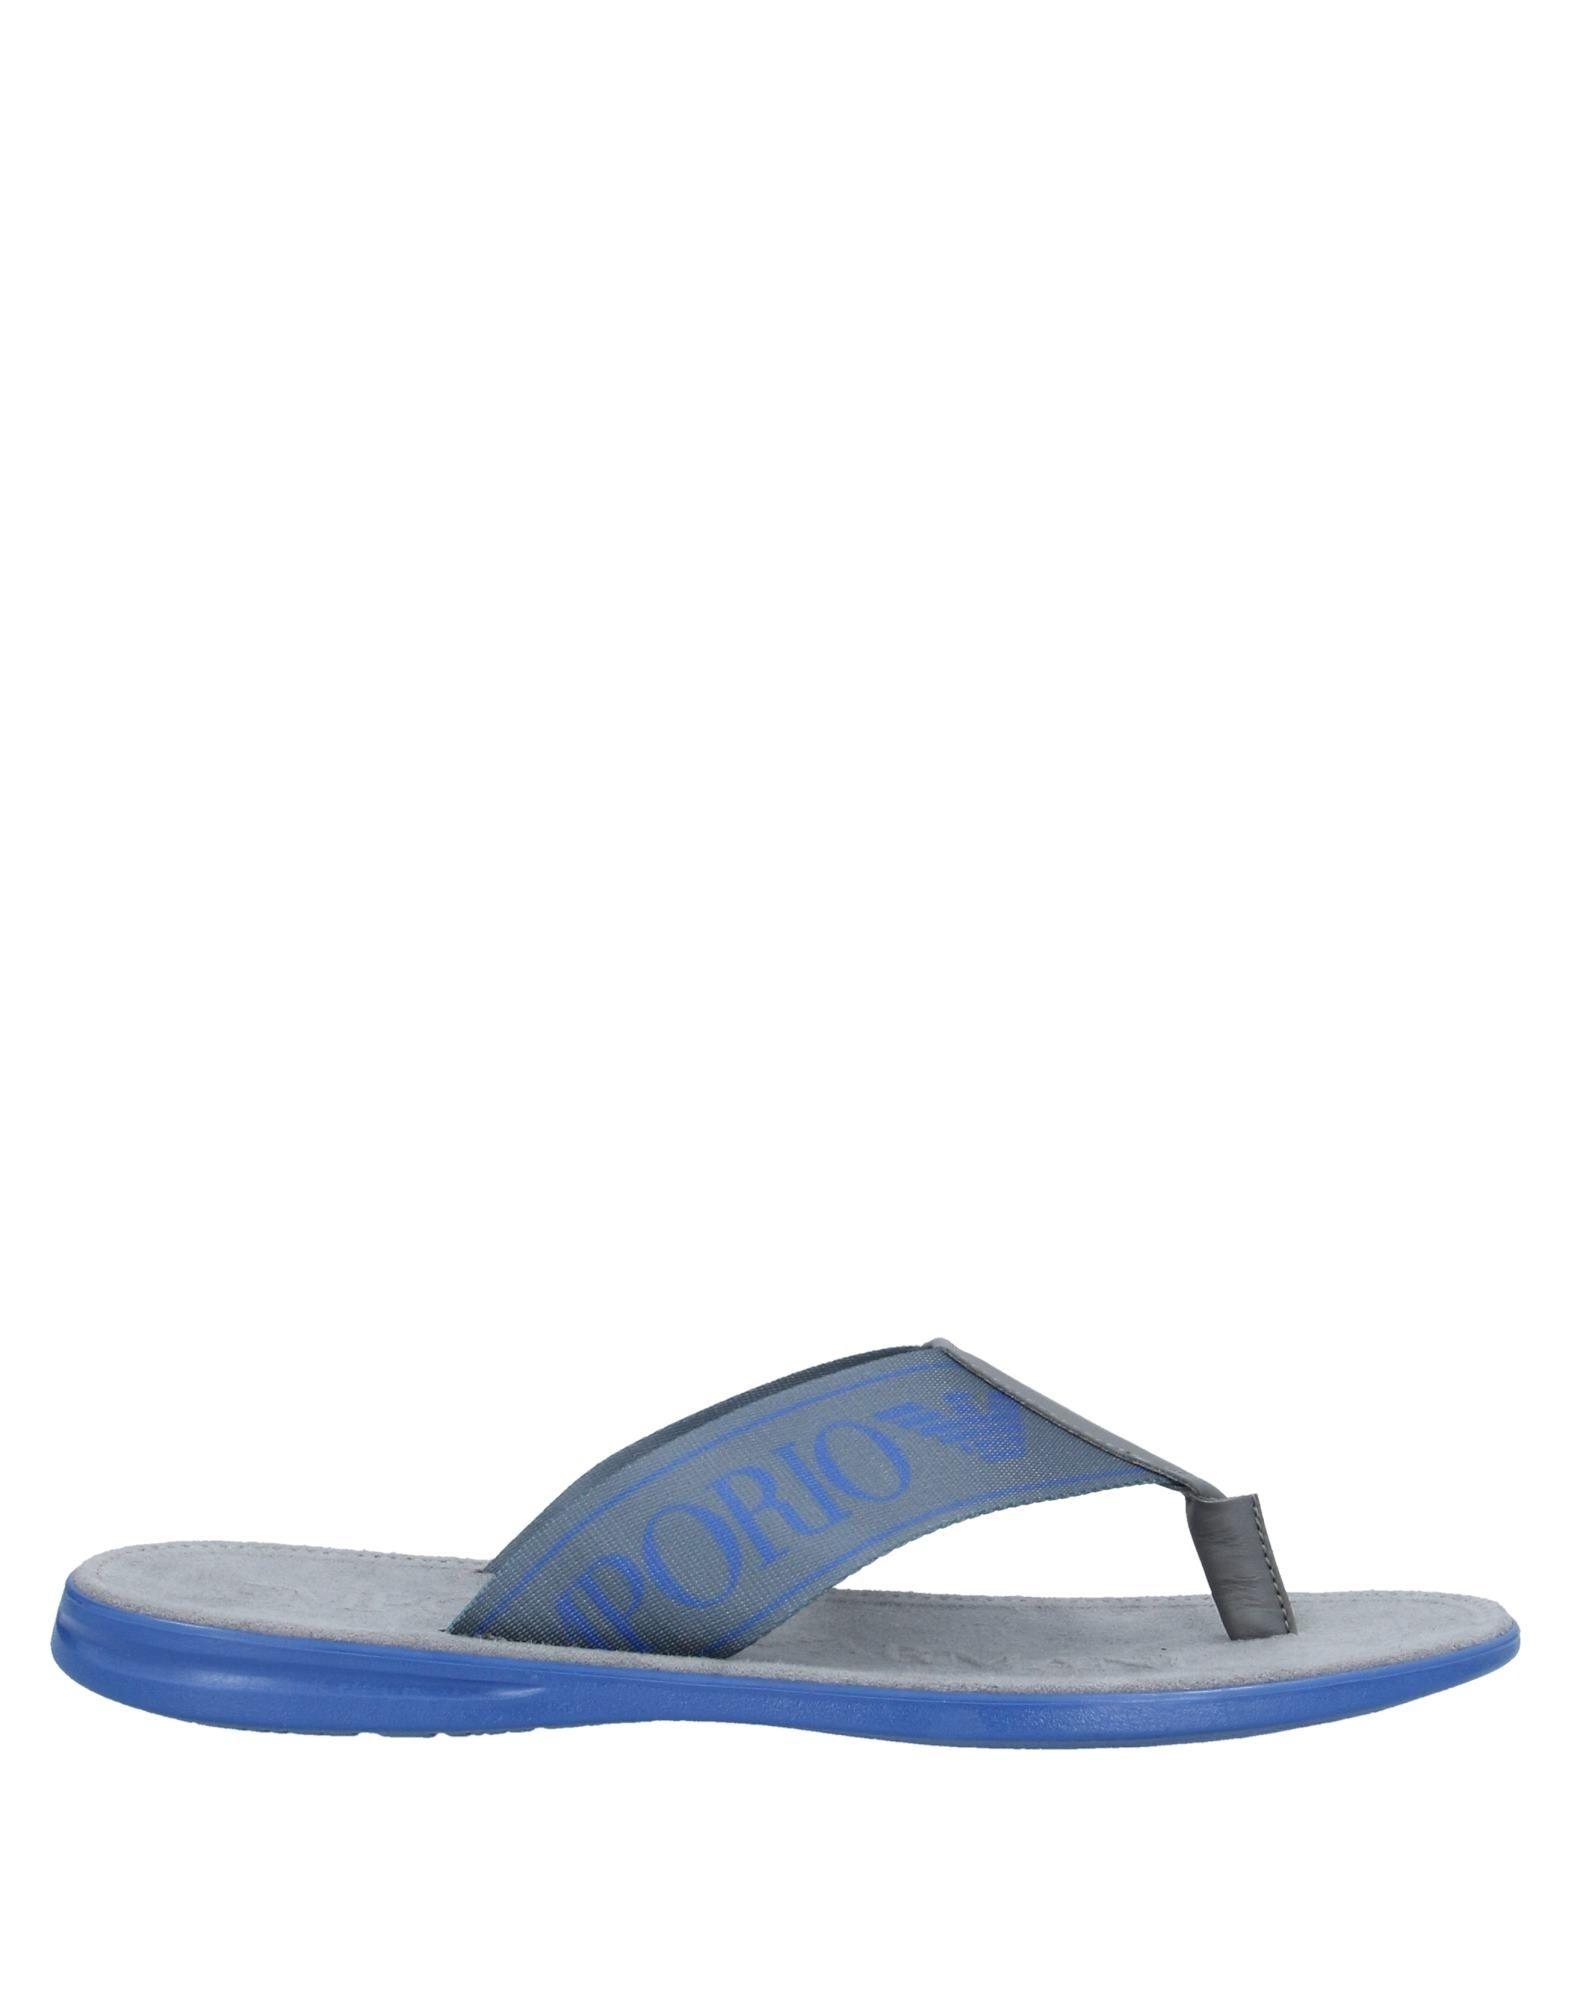 Emporio Armani Leather Toe Post Sandal in Lead (Blue) for Men - Lyst